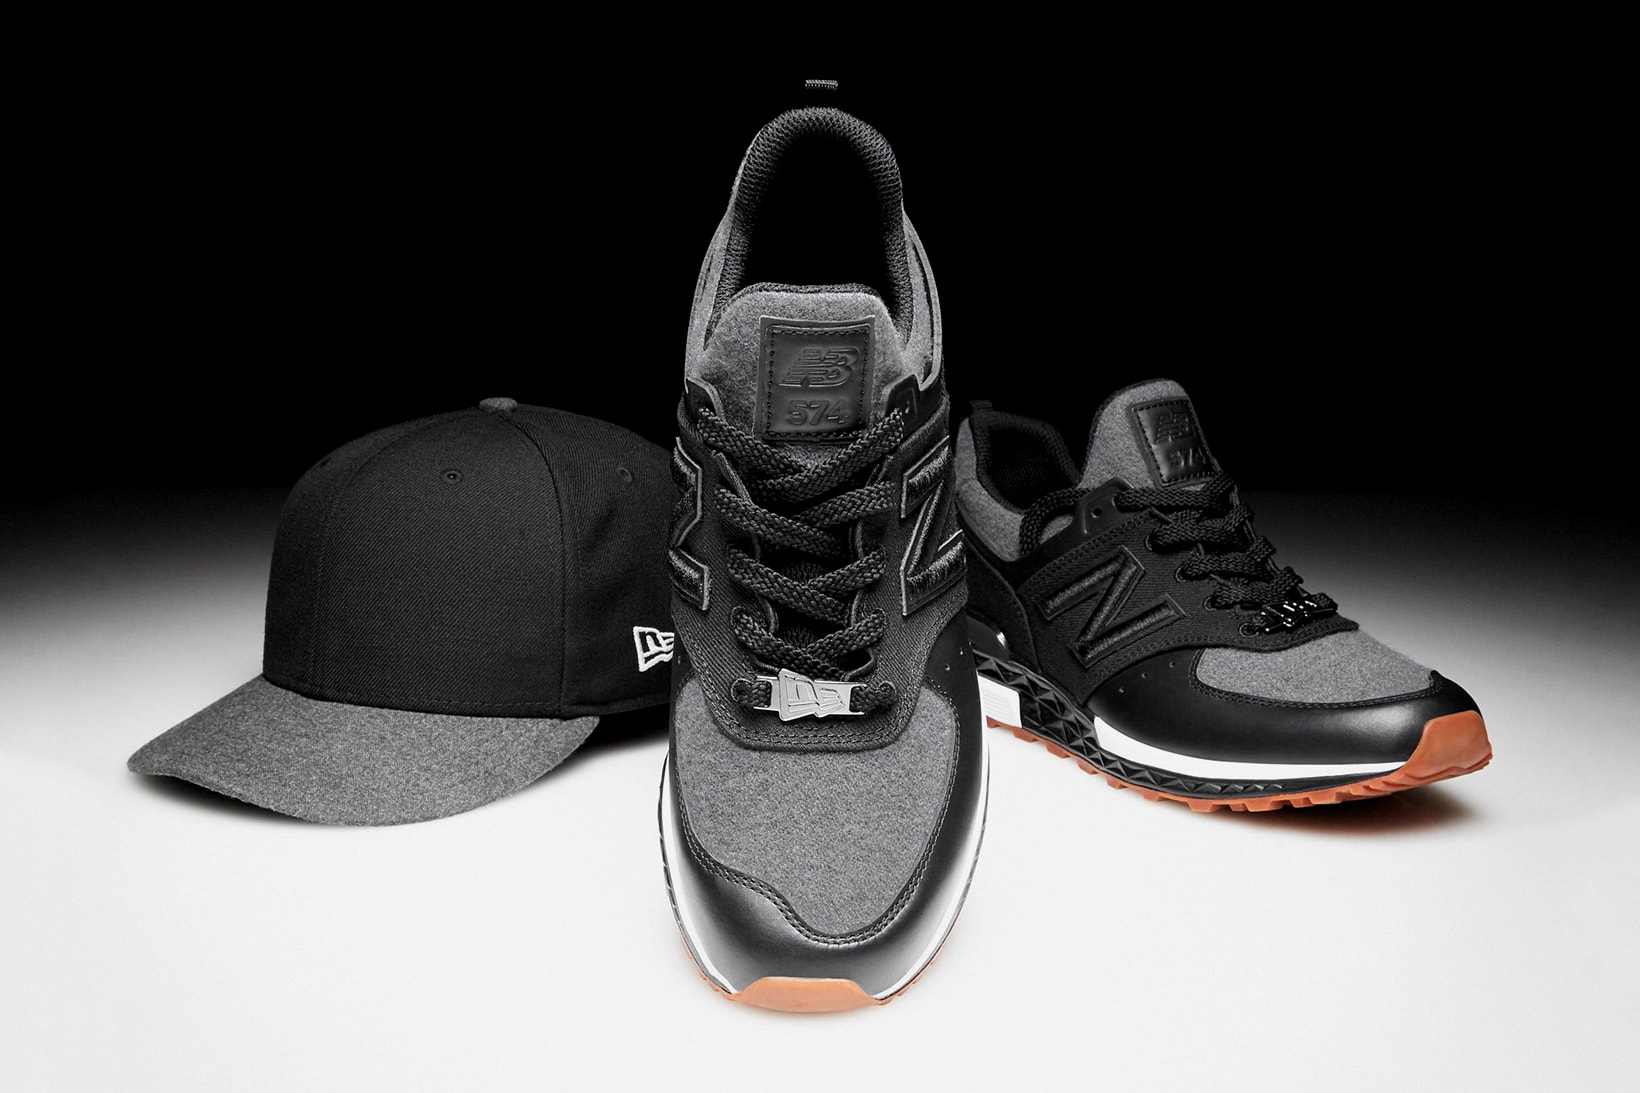 Introducing the Concepts x New Era Heritage Pack, Part II